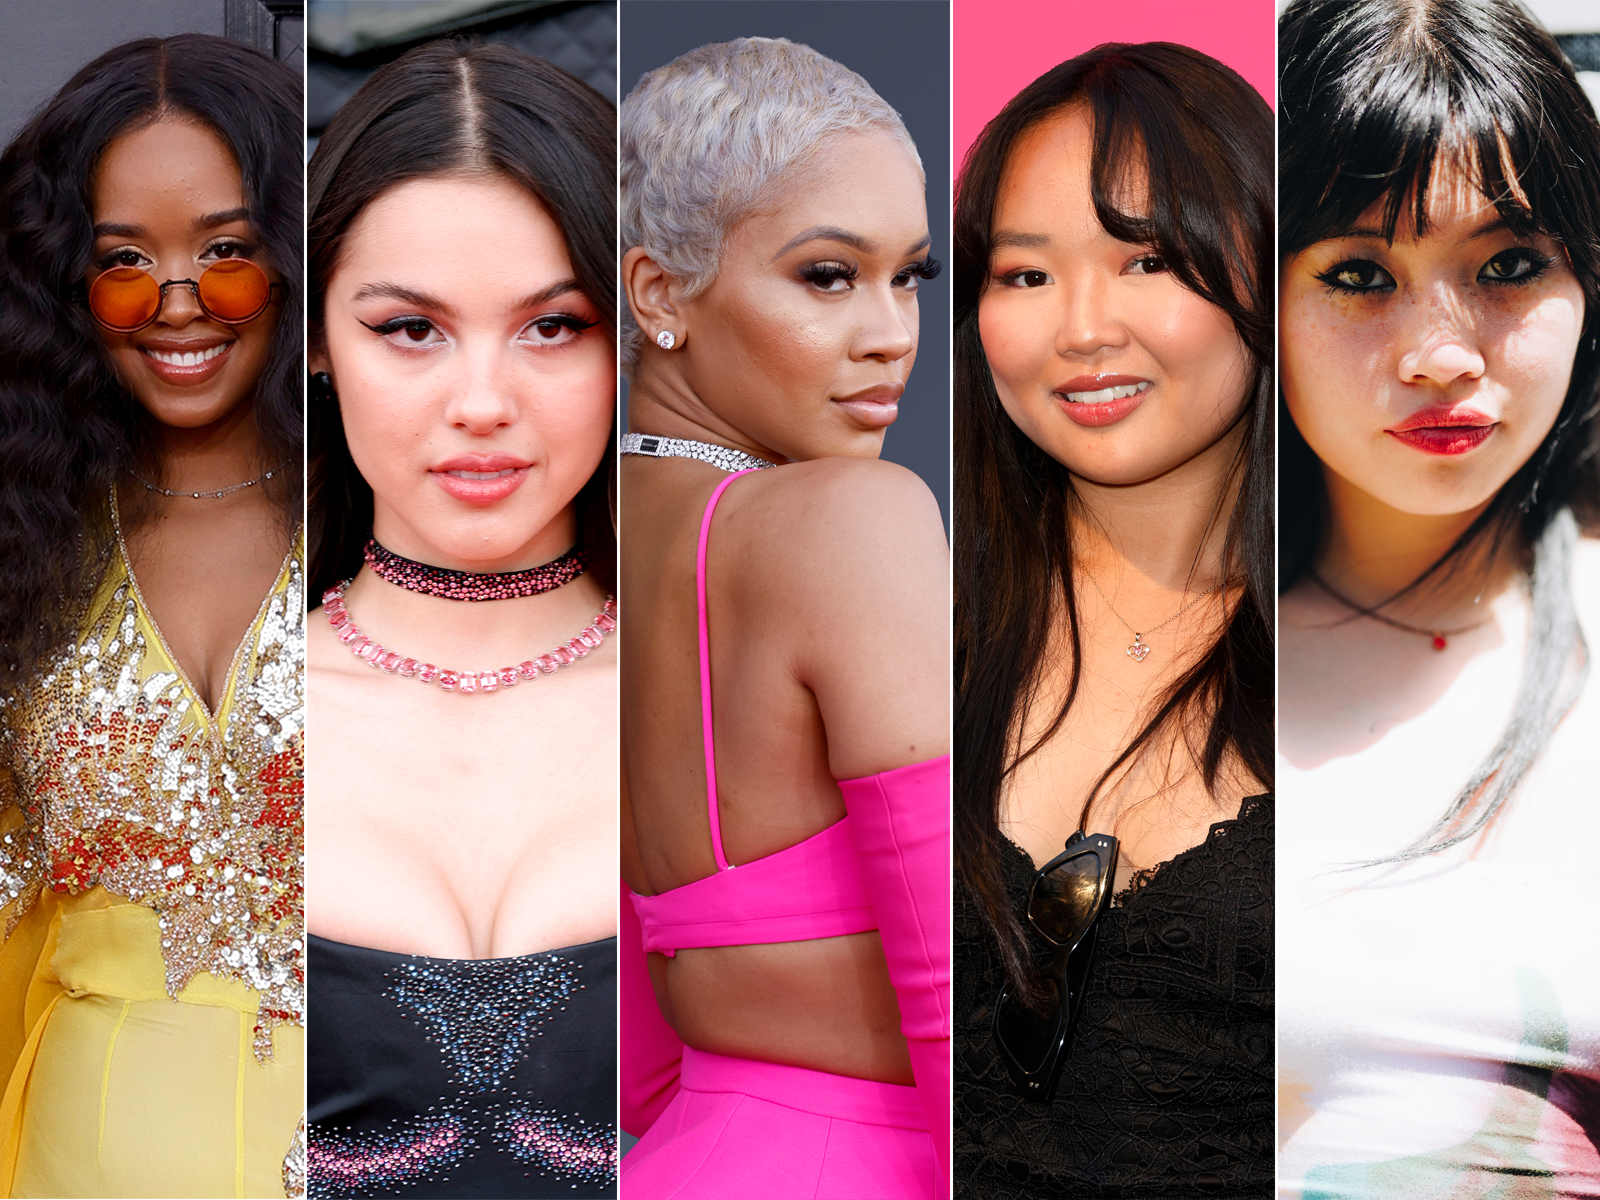 Meet Some Female Singers of Asian Heritage Who are Rocking the Music Scene  - Golden Globes